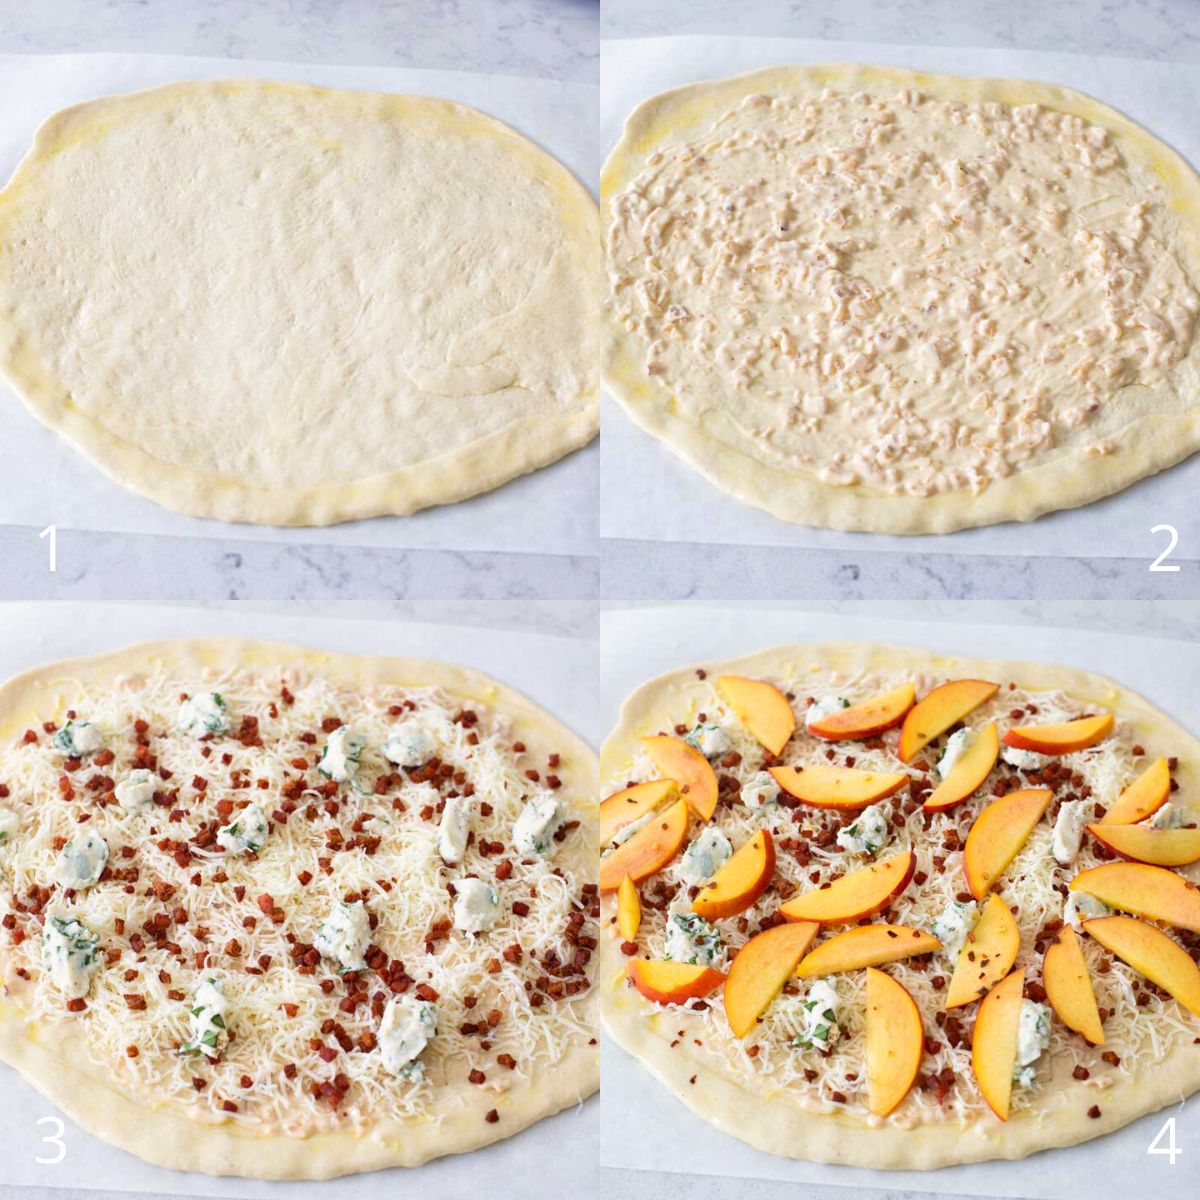 The peach pizza is being assembled in step by step photos.